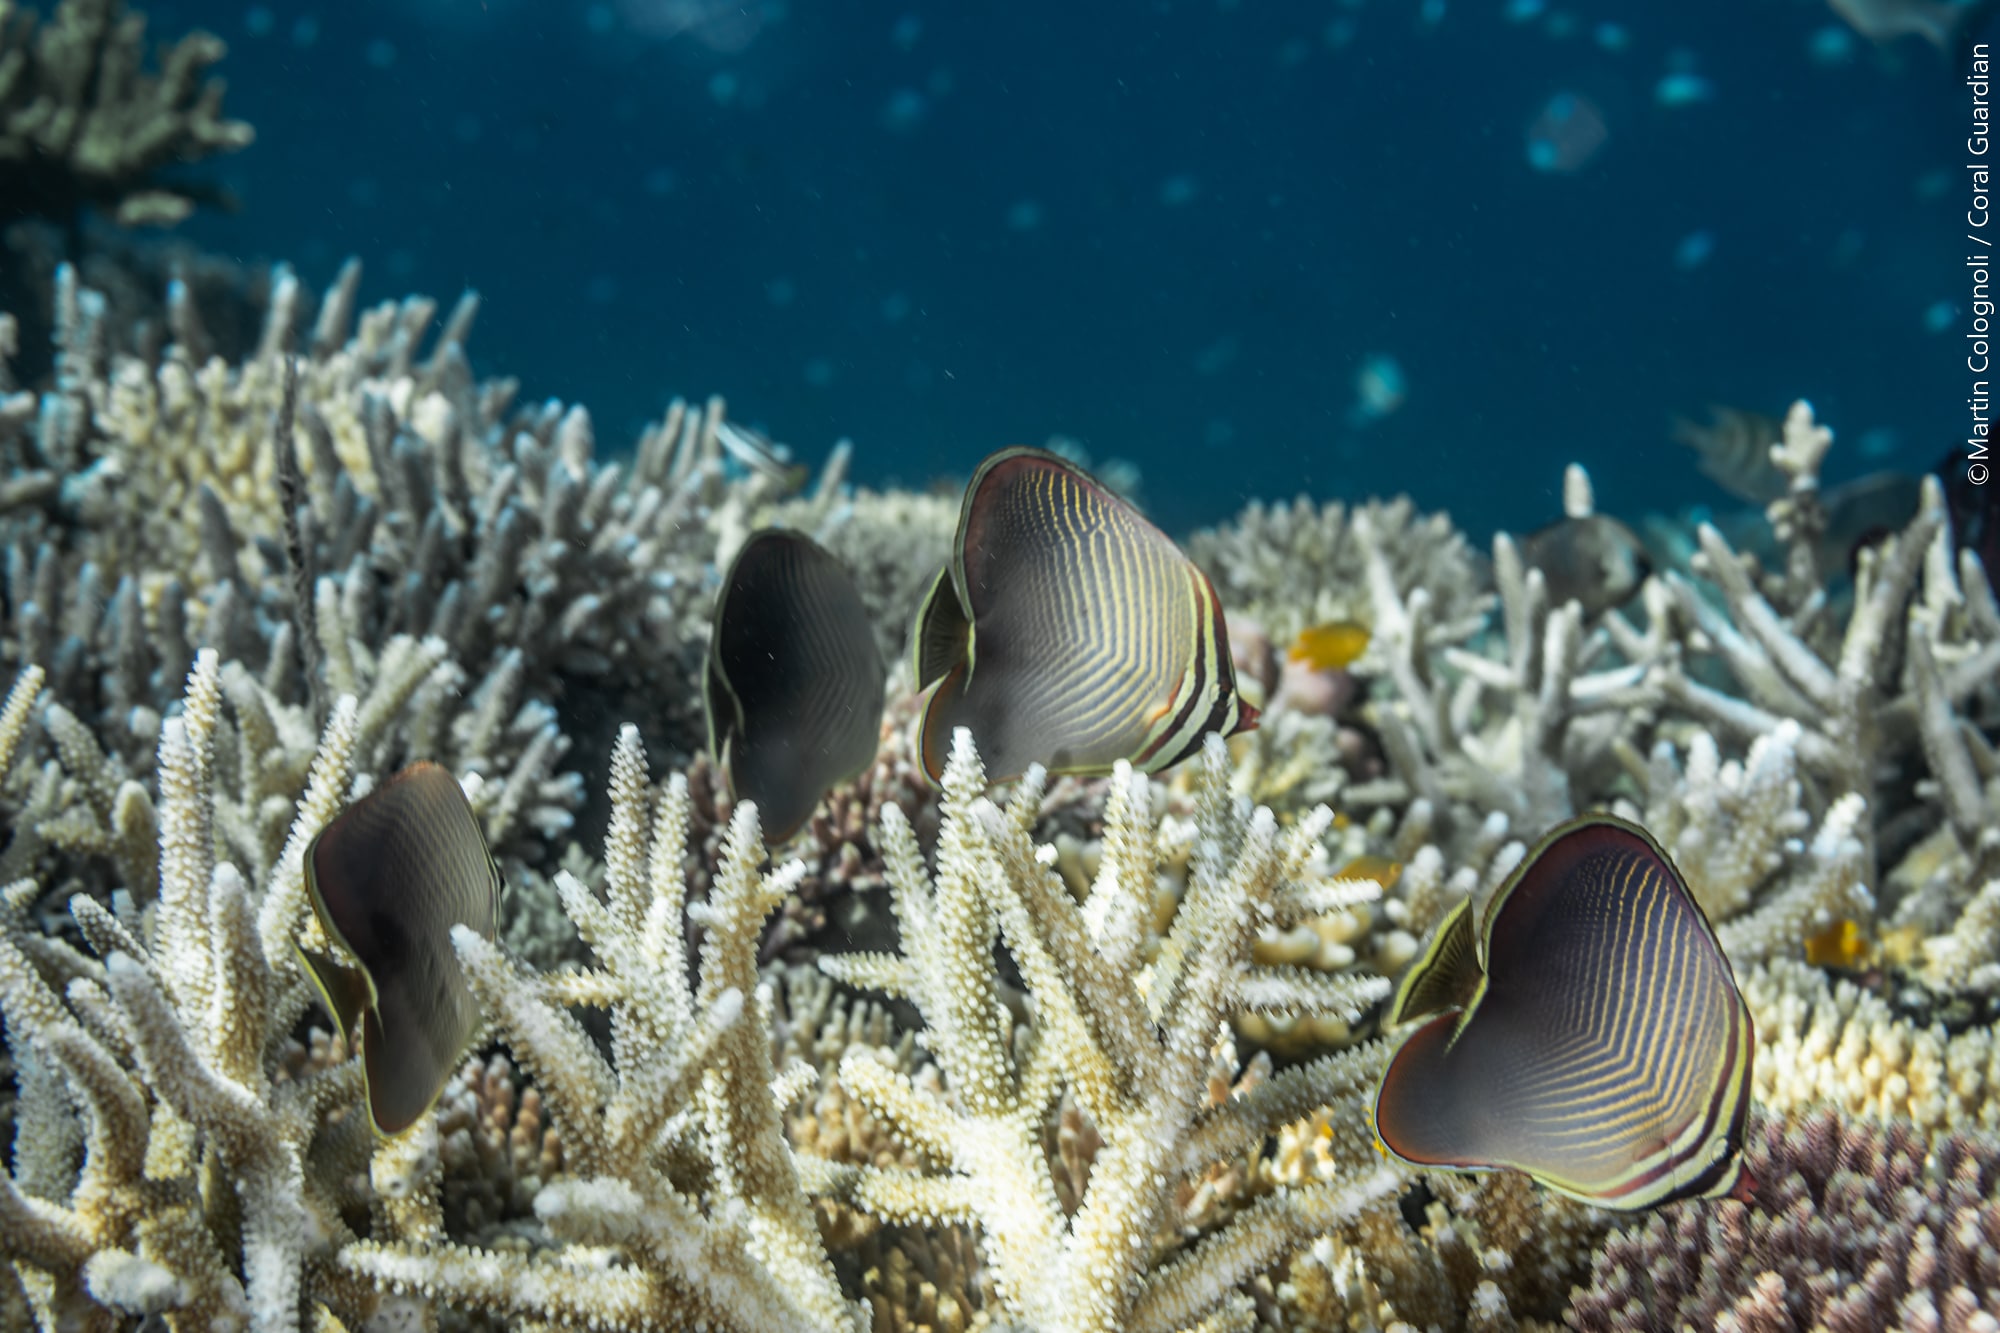 The Great Barrier Reef – Towards an ecological collapse?